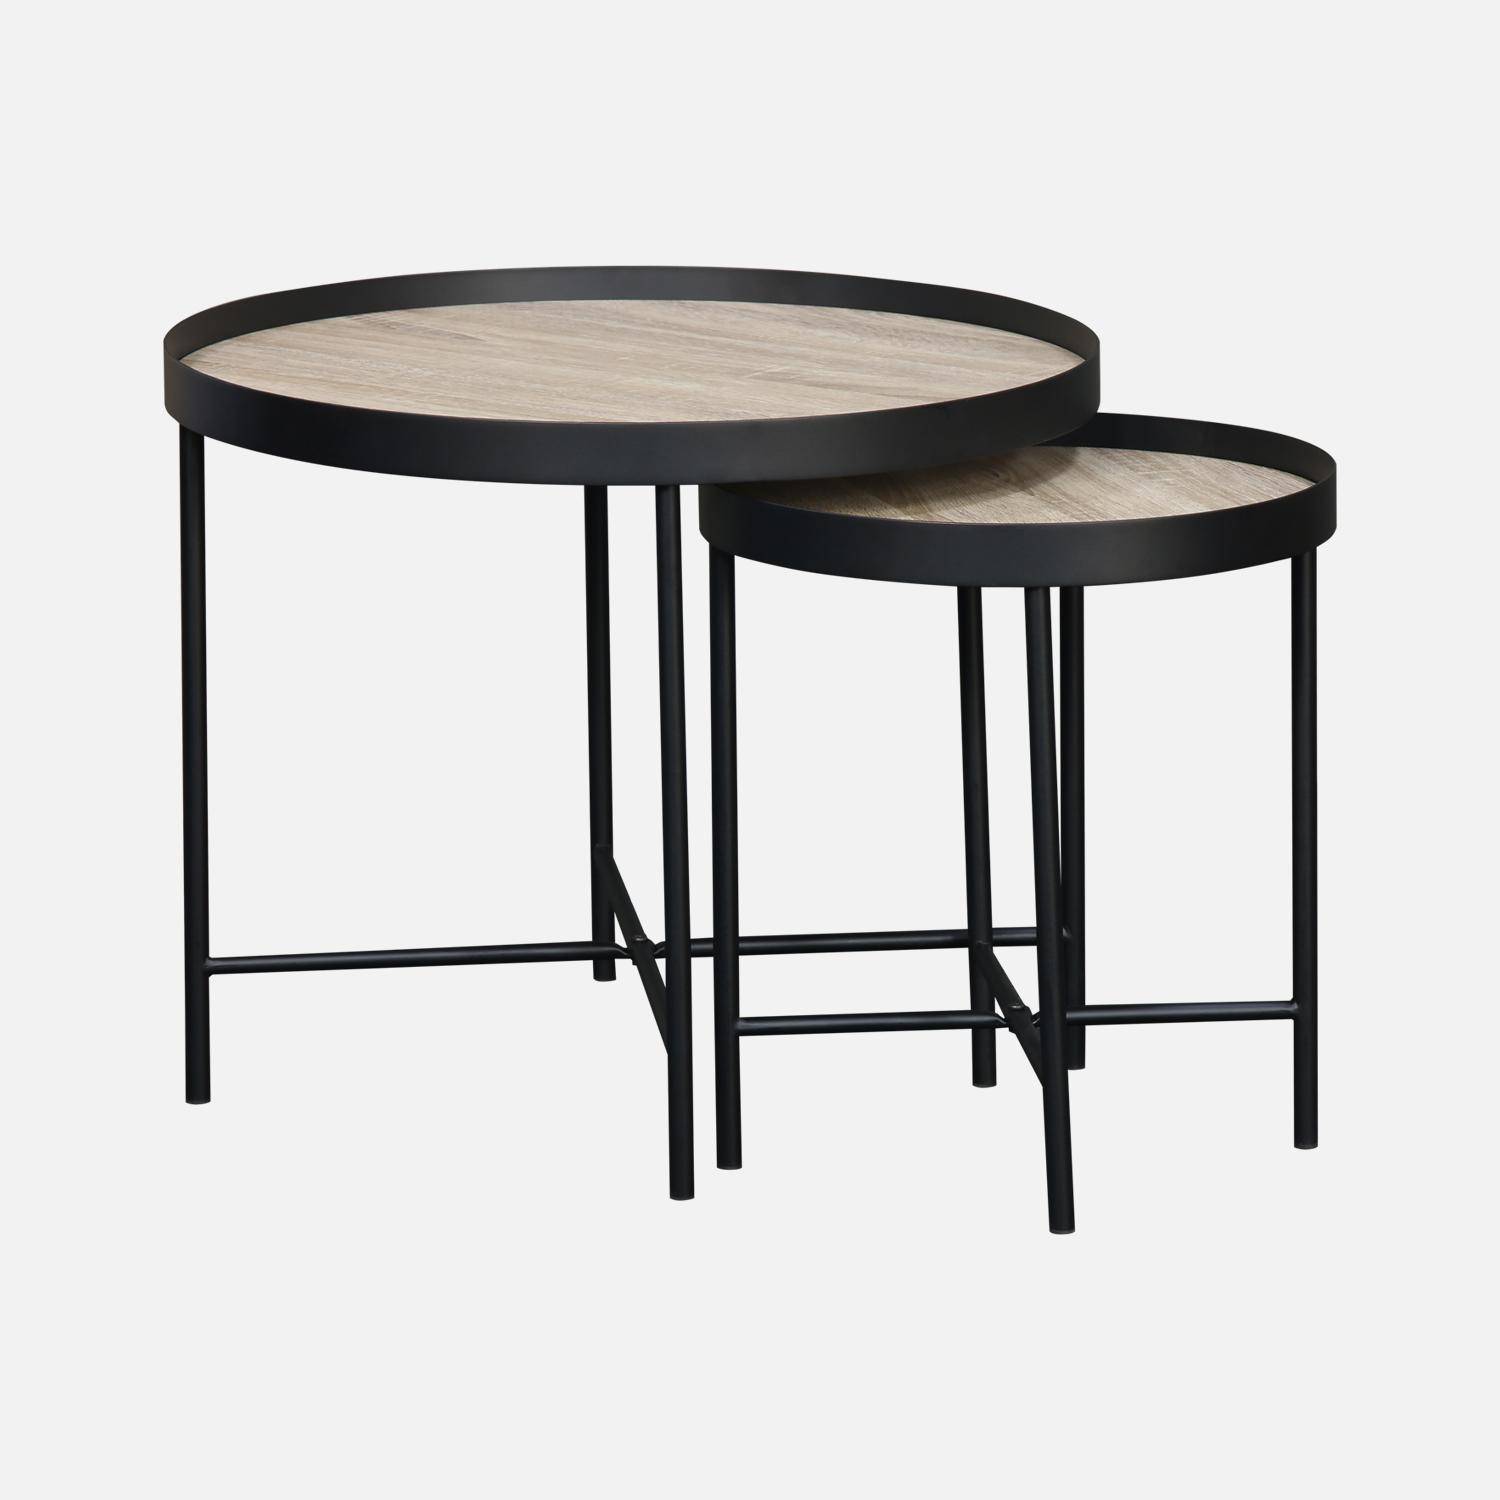 Set of 2 practical round nesting tables in oak-effect MDF with black legs,sweeek,Photo3